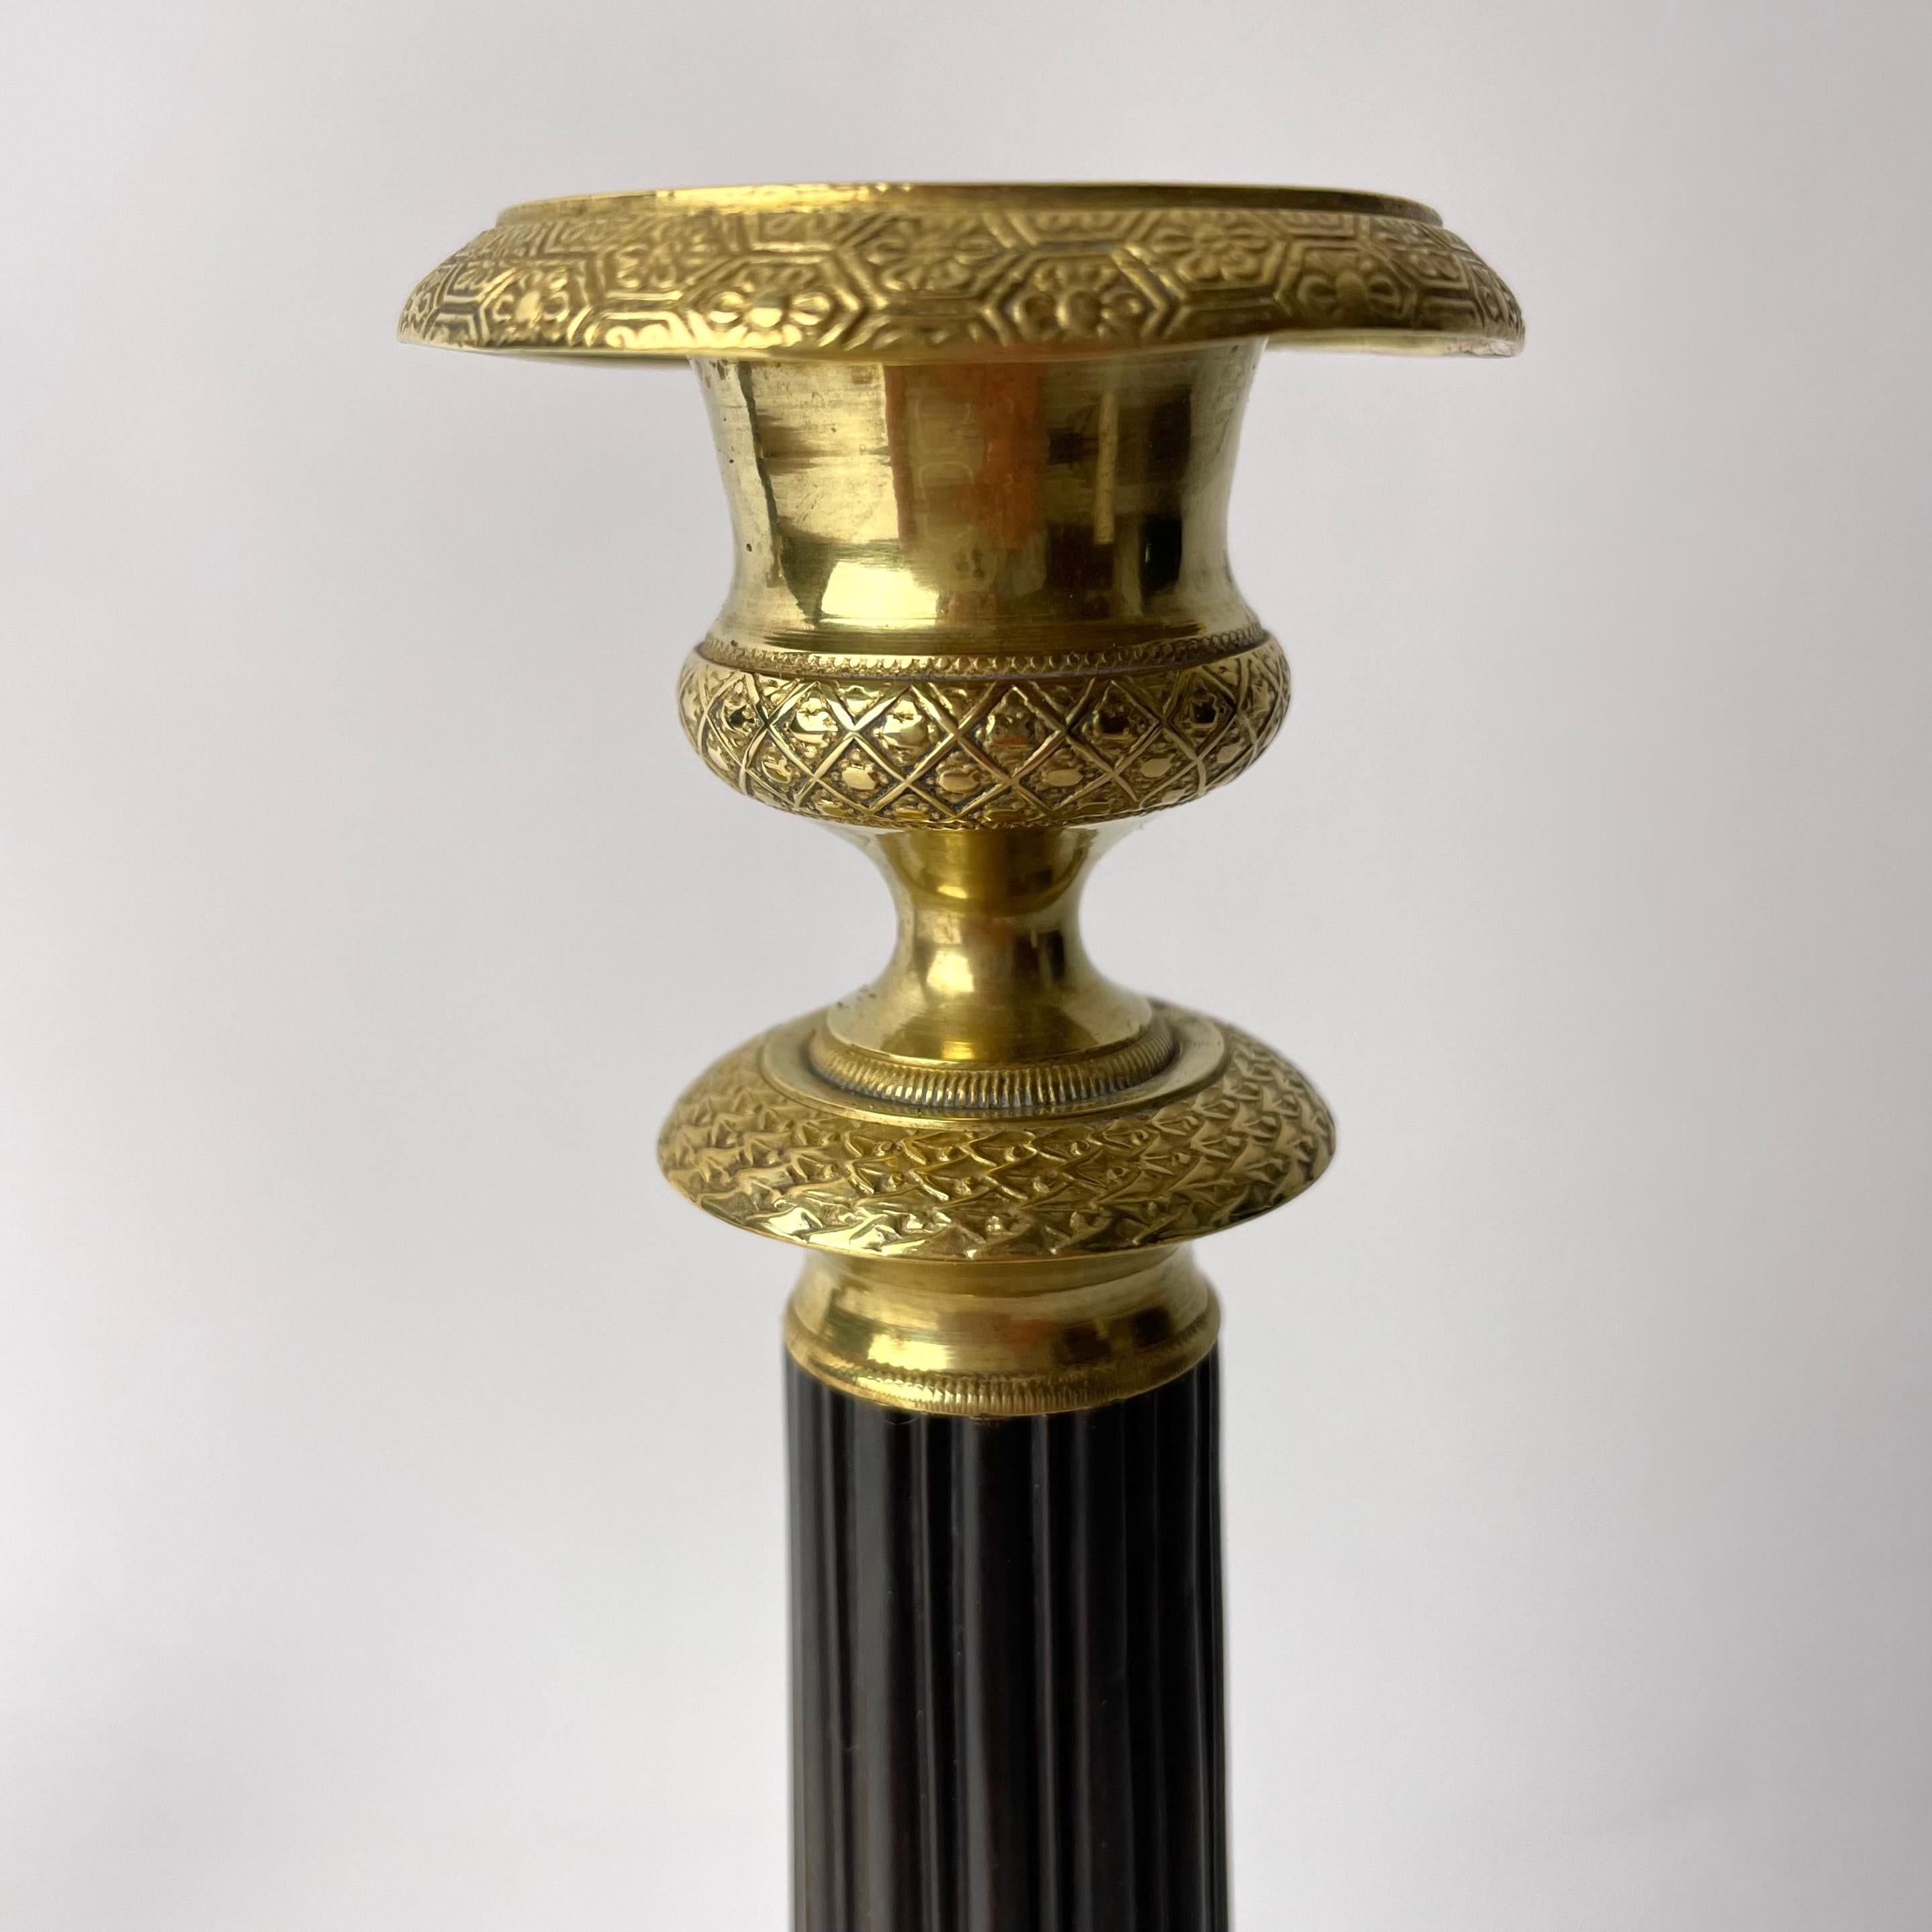 A Pair of Elegant Empire Candlesticks, Gilded and Patinated Brass, 1820s France In Good Condition For Sale In Knivsta, SE